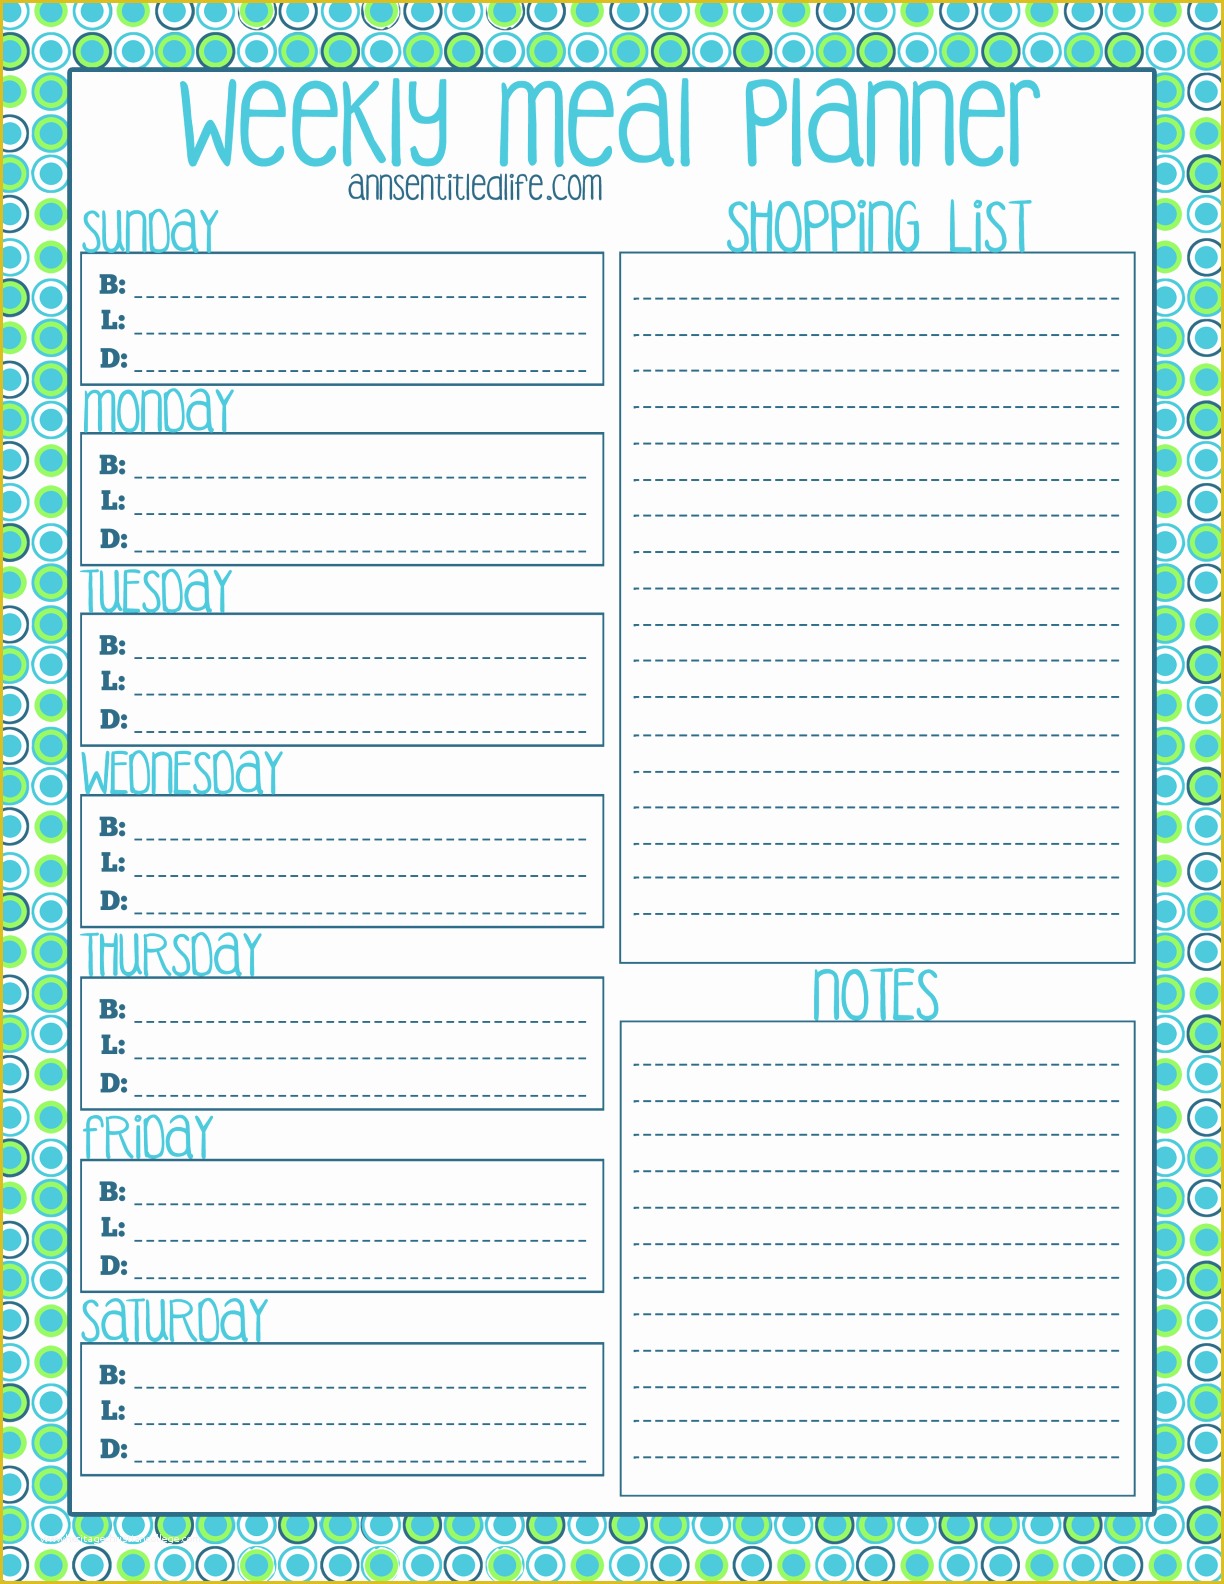 Free Meal Planner Template Of Free Printable Recipe Card Meal Planner and Kitchen Labels